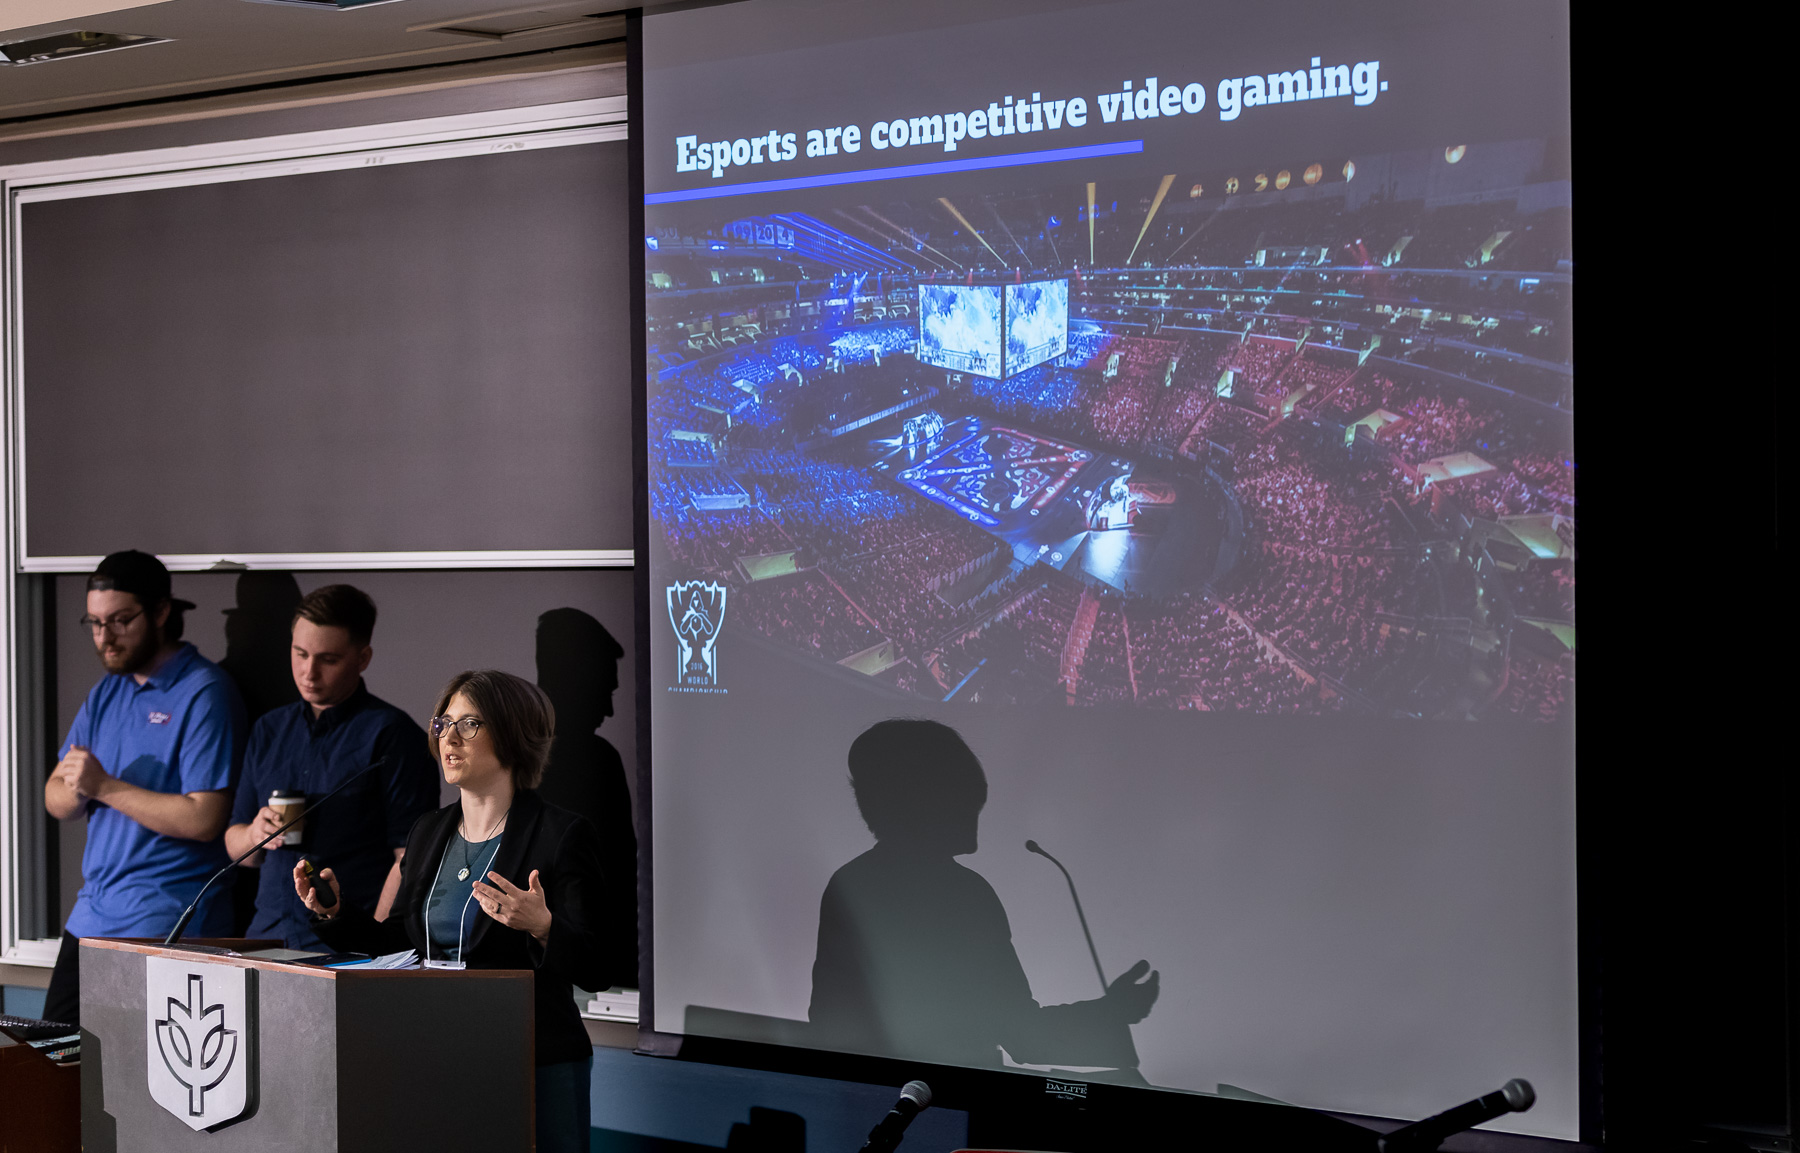 Samantha Close, assistant professor in the College of Communication, presents her project, Esports at DePaul: An Opportunity to Advance Vincentian Values & Establish Academic Leadership in a Cultural Phenomenon. (DePaul University/Jeff Carrion)